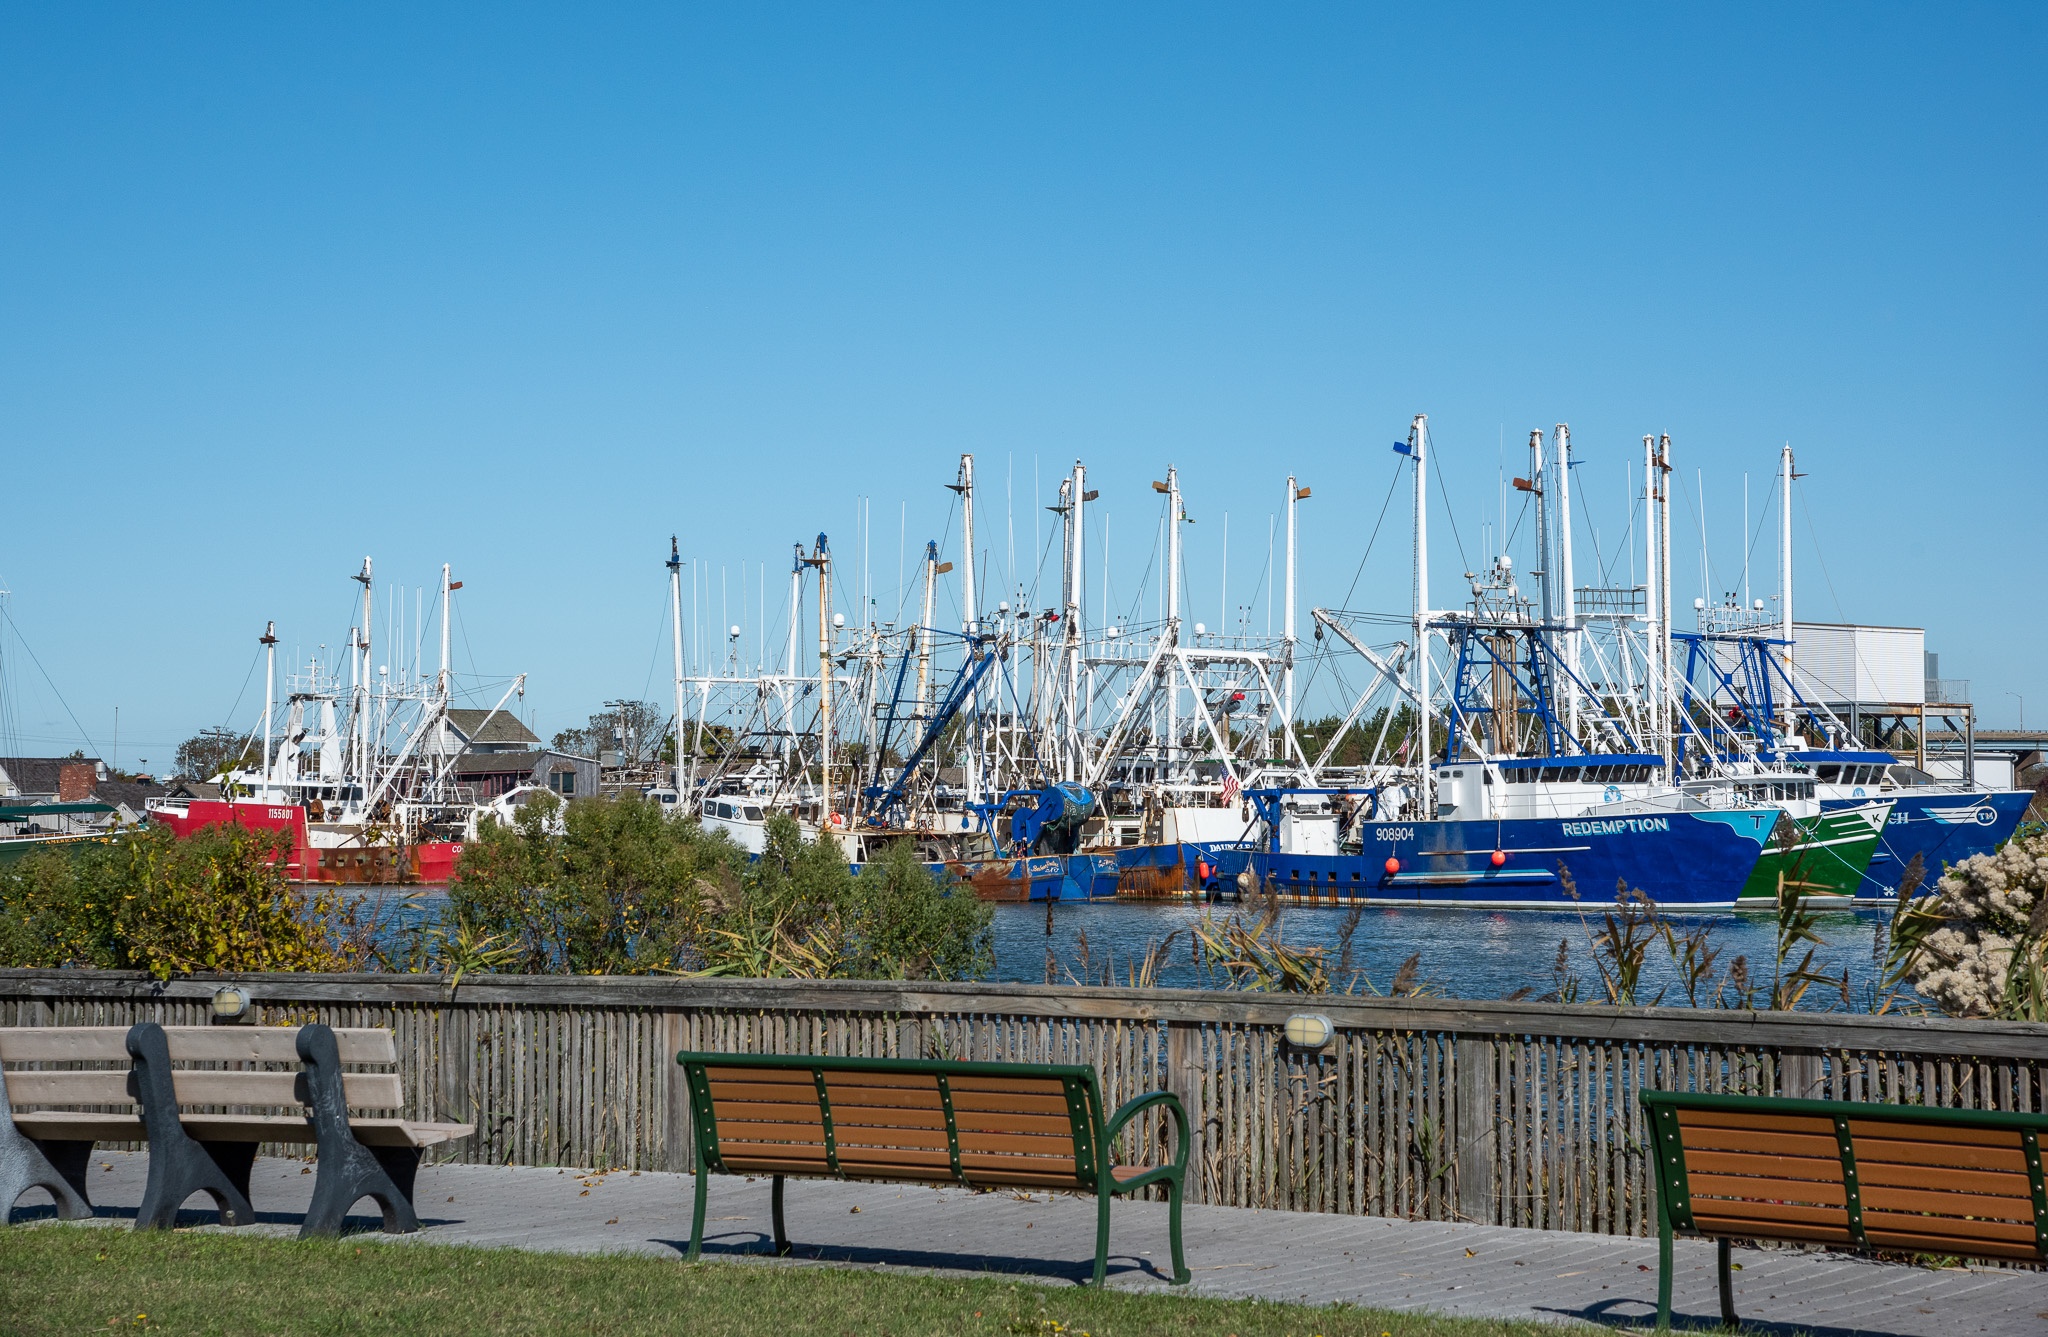 Harbor View Park looking at the fishing boats along the dock